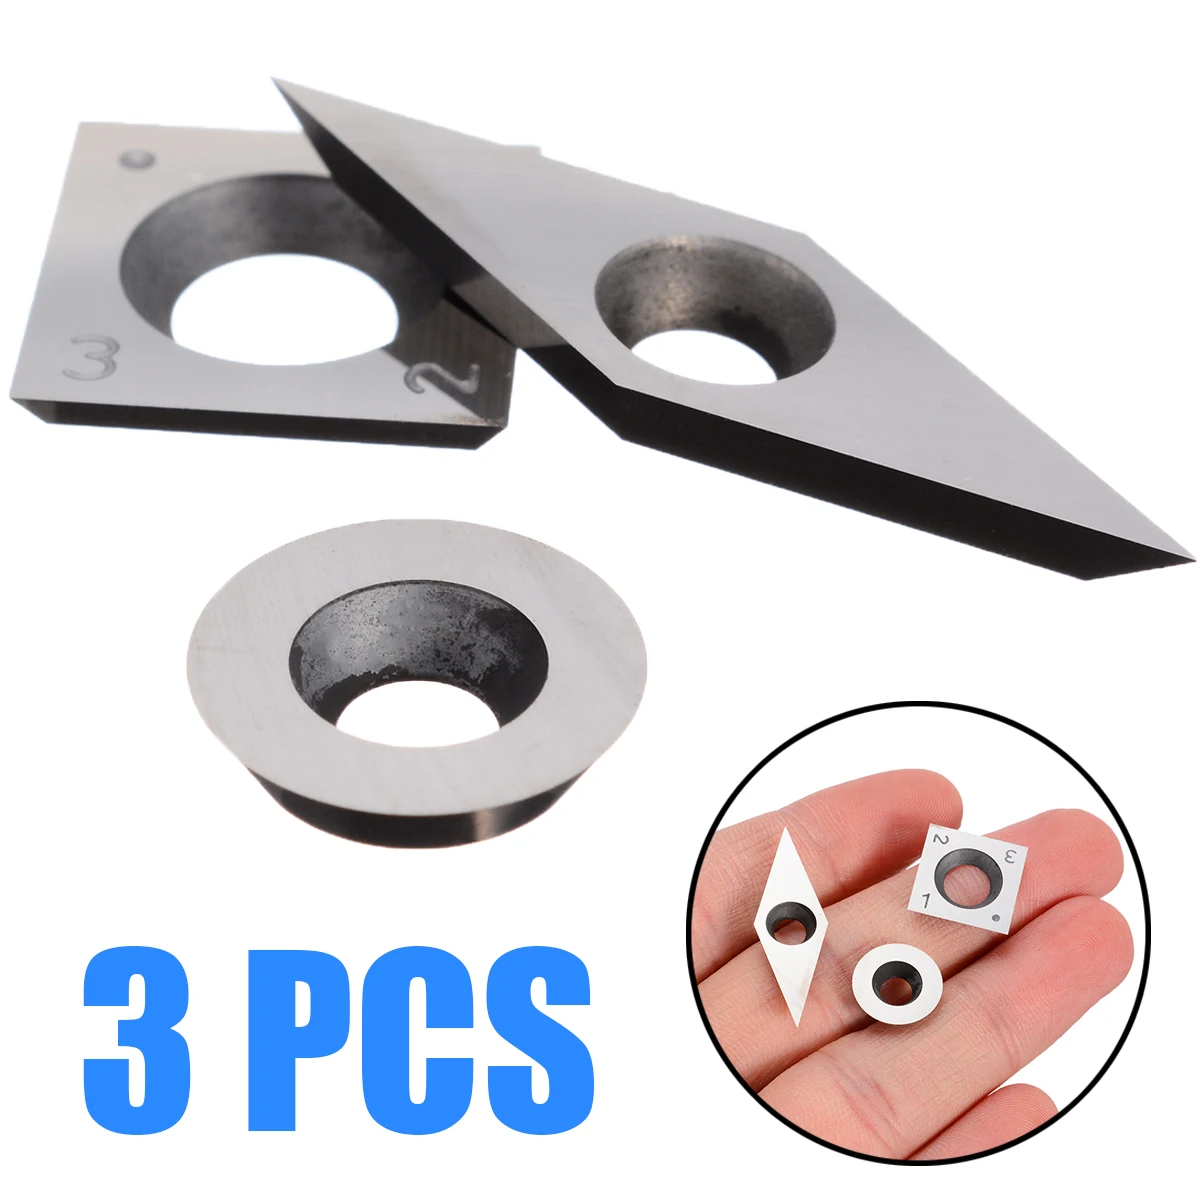 

3pcs/Set Solid Tungsten Blades 94.5HRA Carbide Inserts CNC Lathe Turning Tool Cutters for Machining Wood Chipboard MDF/HDF